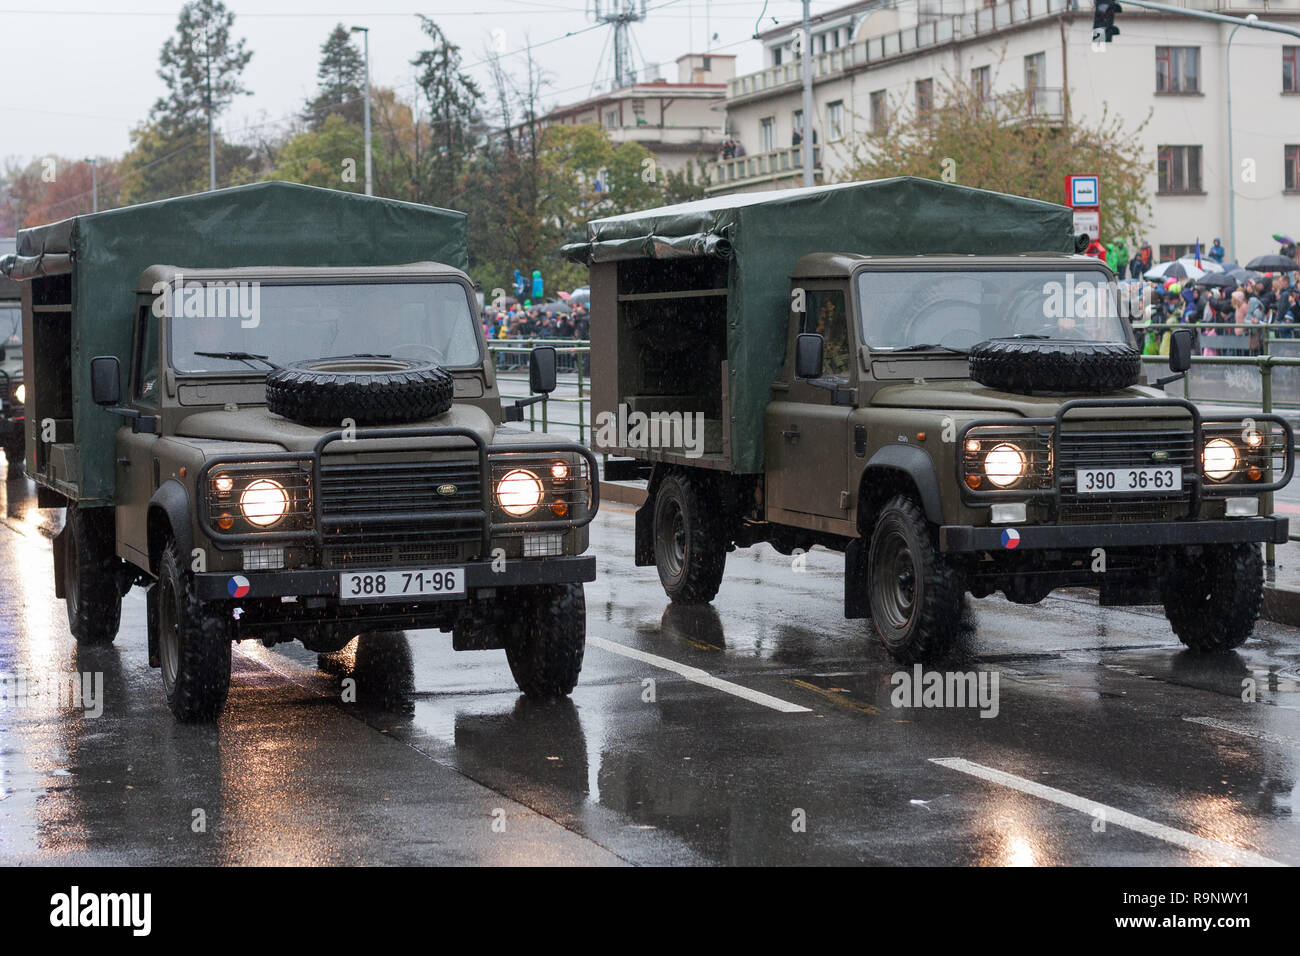 European street, Prague-October 28, 2018: Soldiers of Czech Army are riding Land Rover Defender 130 on military parade on October 28, 2018 in Prague,  Stock Photo